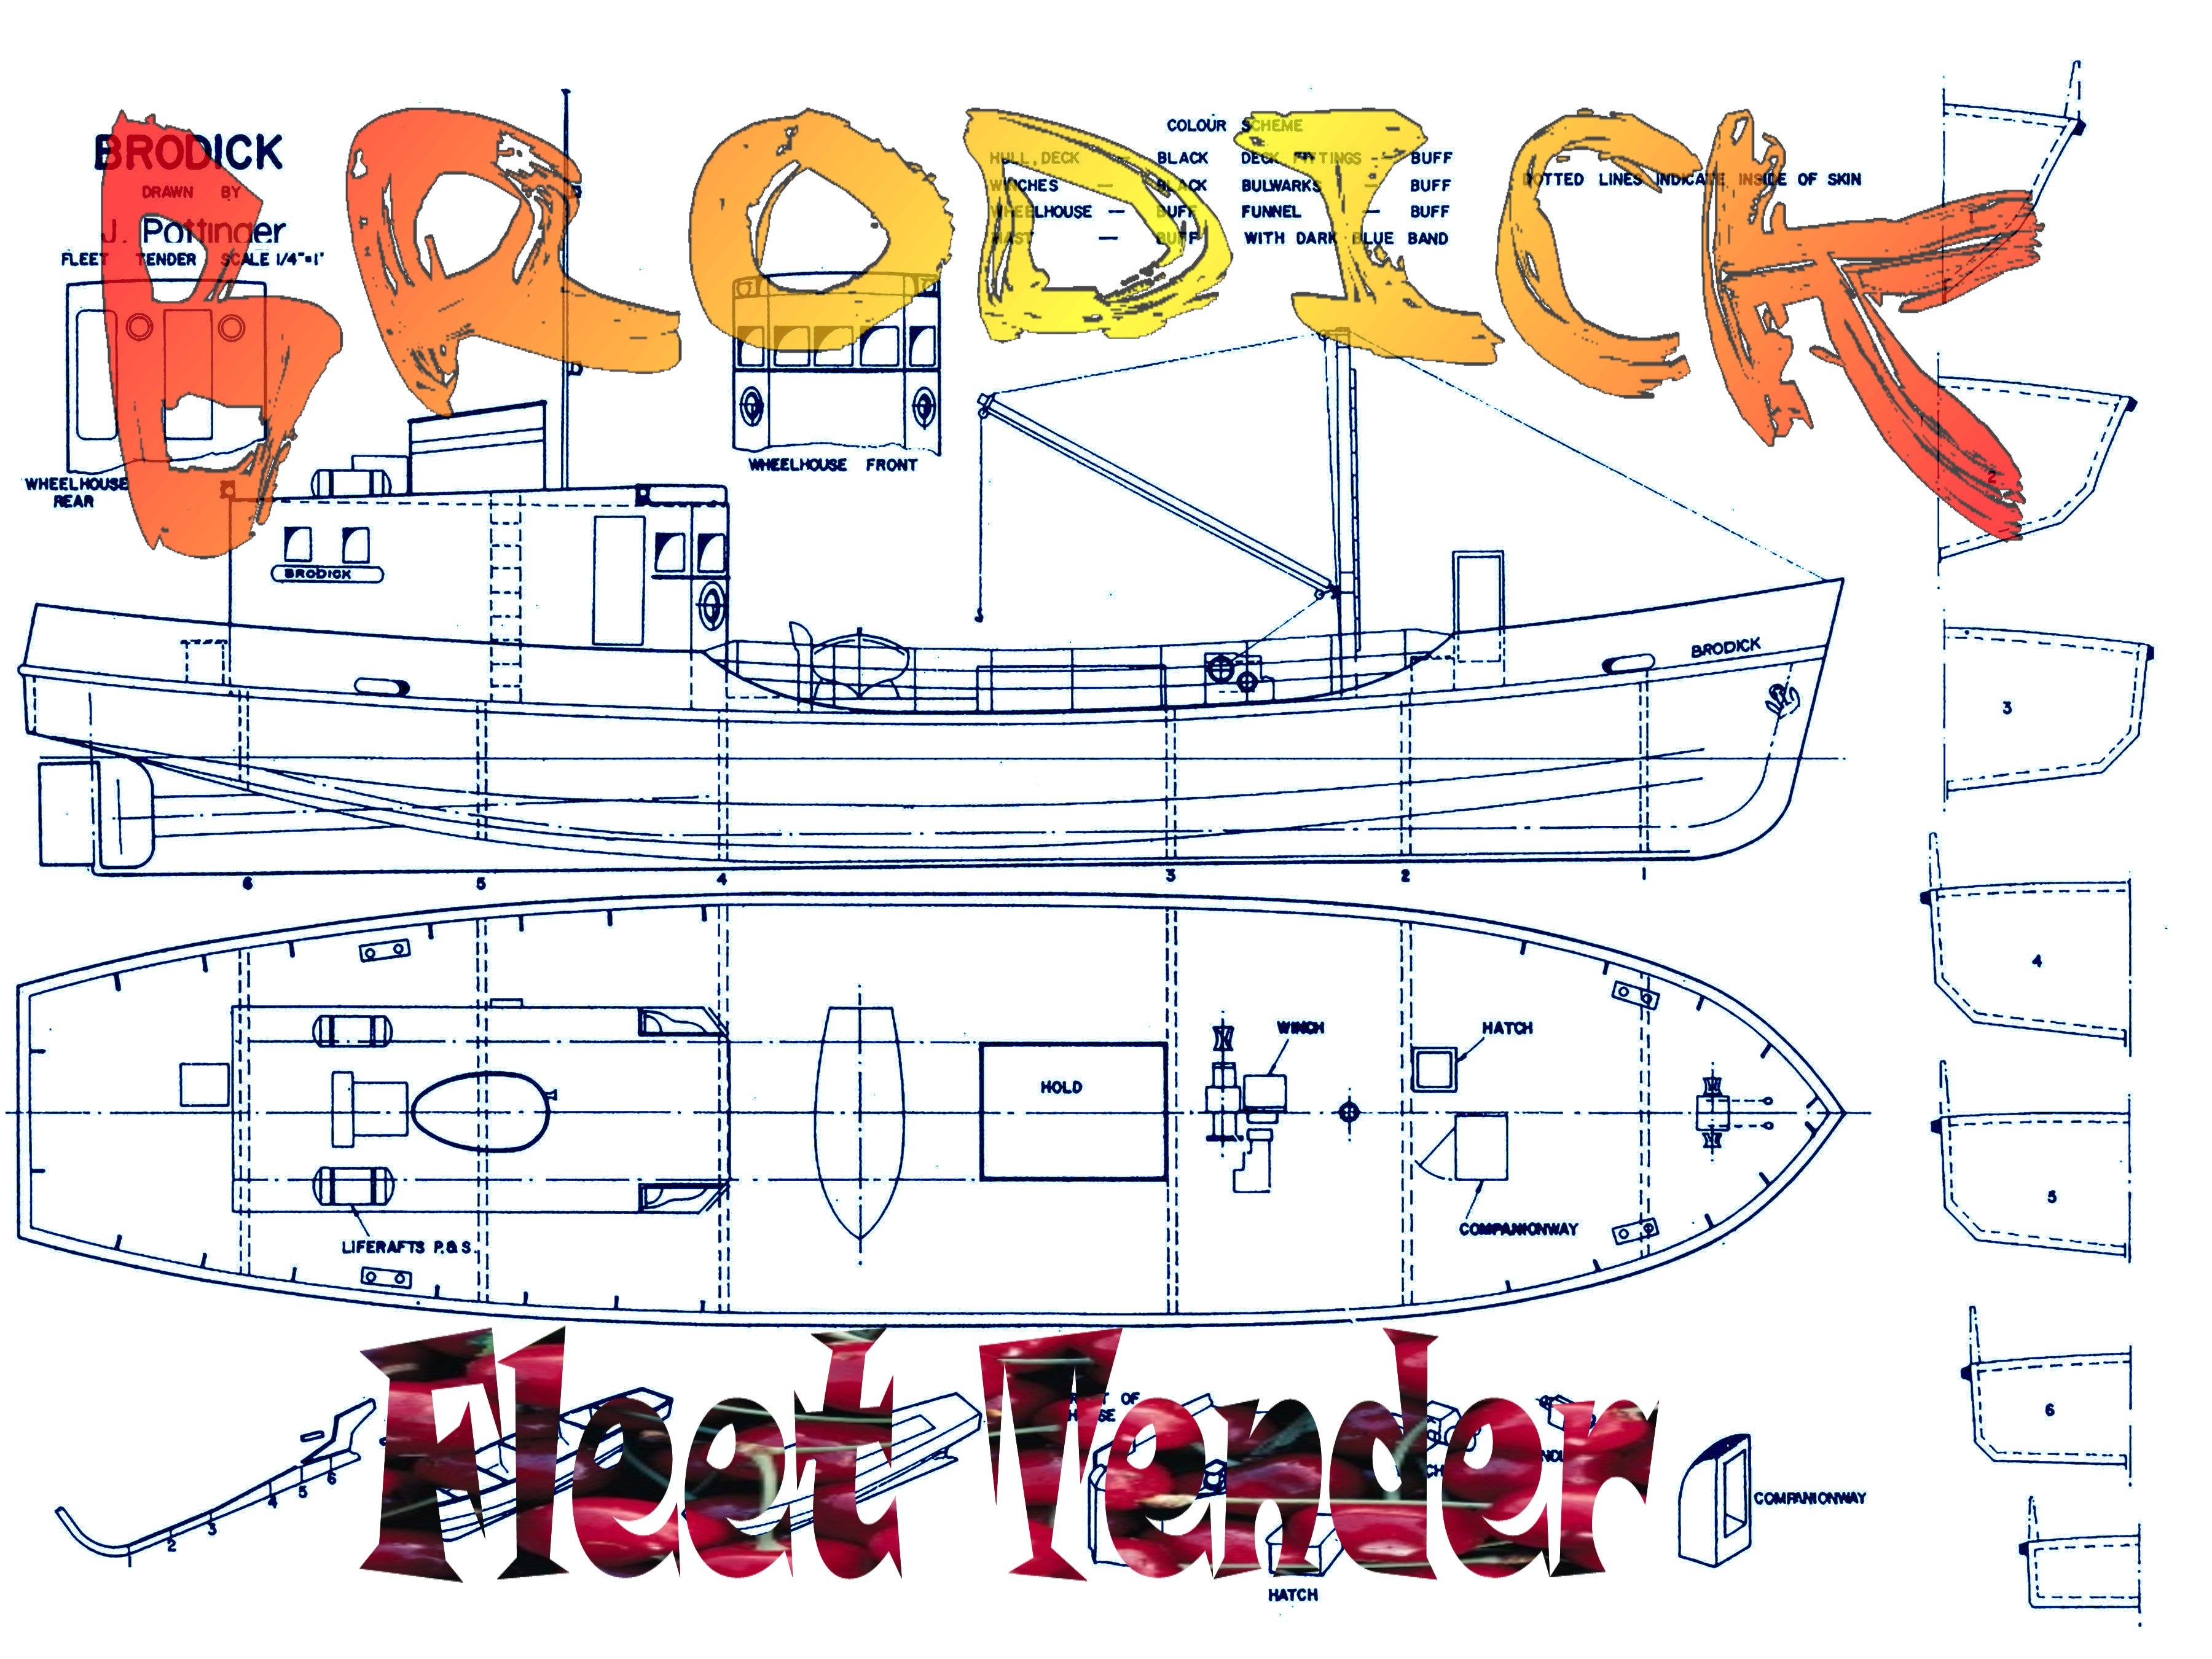 full size printed plans scale 1:48  l 19 13/16" brodick fleet tender suitable for small radio control or display